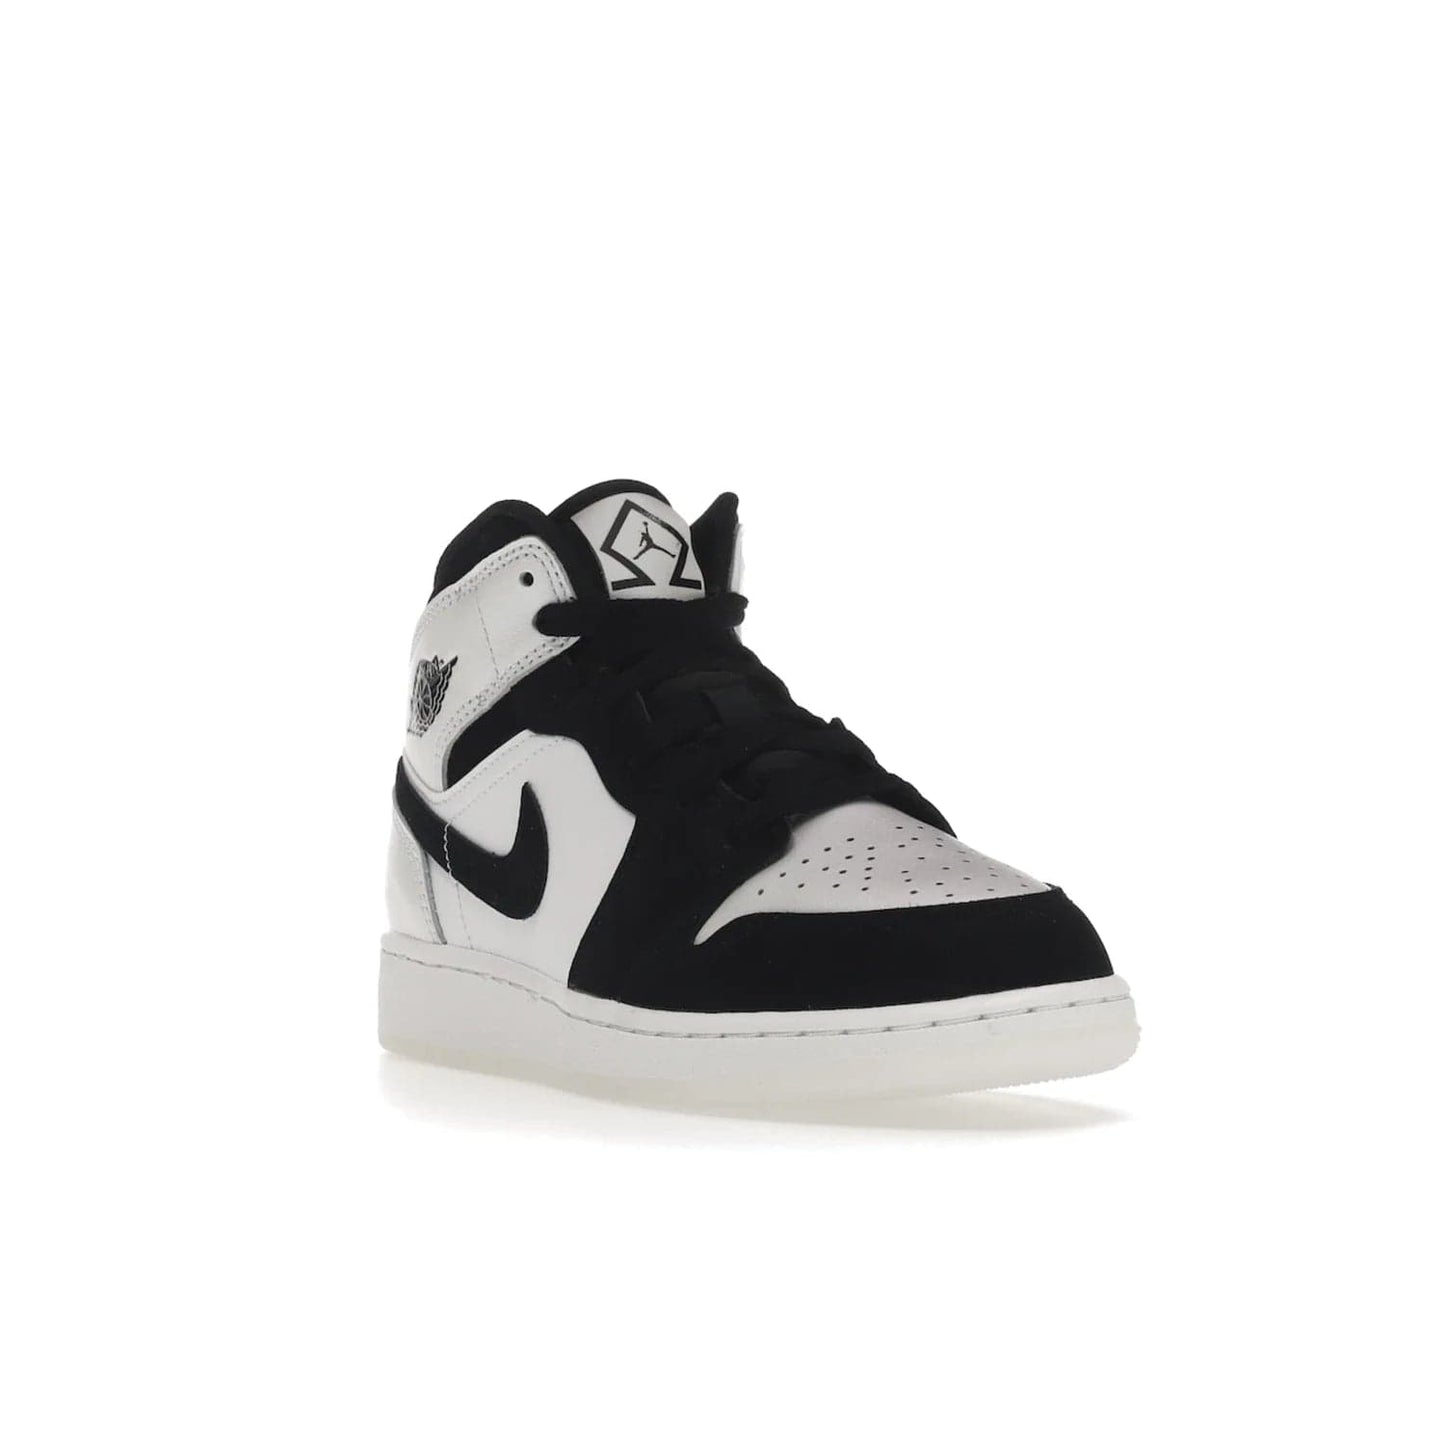 Jordan 1 Mid Diamond Shorts (GS) - Image 7 - Only at www.BallersClubKickz.com - Get the Jordan 1 Mid Diamond Shorts GS on 9th Feb 2022! Features a white, black & suede design with nylon tongue, stamped wings logo, rubber midsole & outsole. Only $100!